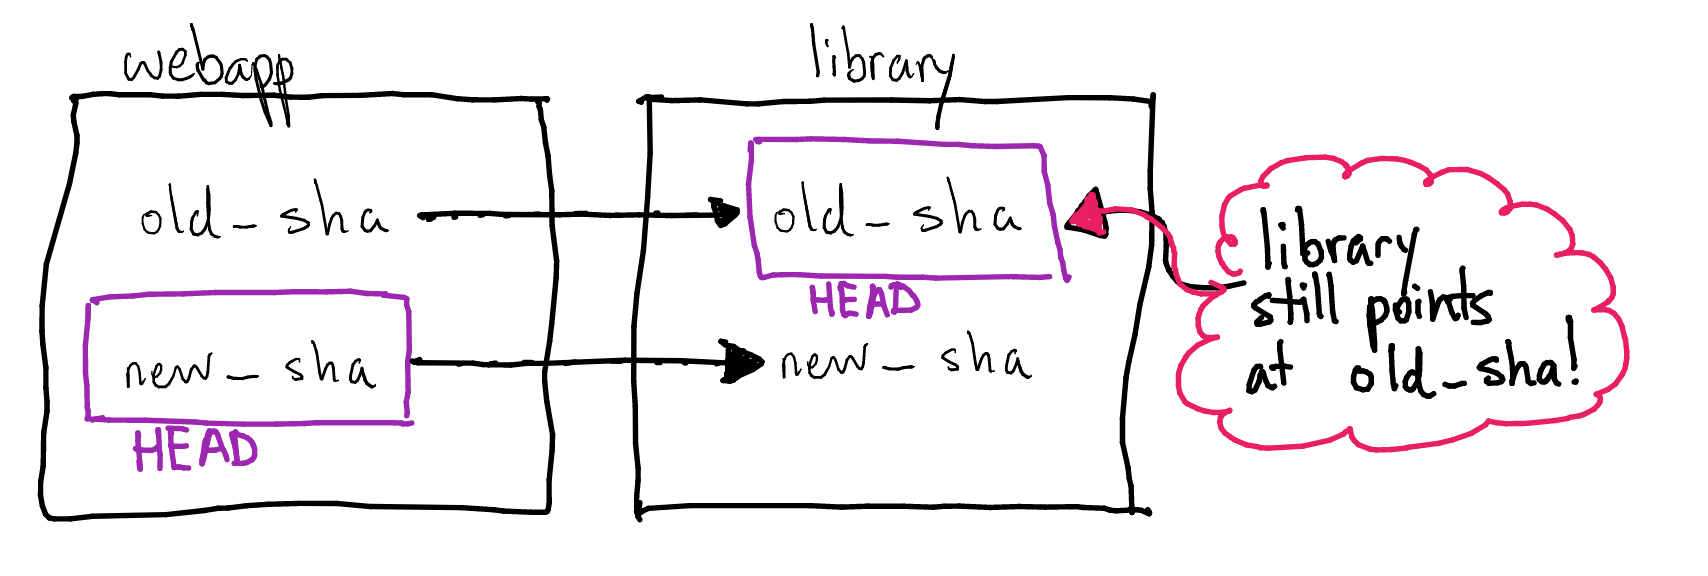 Hand-drawn diagram of two git repositories, webapp and library. It shows that the old_sha commit of the webapp repo points to the old_sha commit of the library repo. The new_sha commit of the webapp repo points to the new_sha of the library repo. The new_sha commit of the webapp repo has a purple border around it, saying 'HEAD'. The old_sha commit of the library repo has a purple border around it, saying 'HEAD'. A red arrow points to the purple border around old_sha in the library repo. The red arrow is linked to a speech bubble which says, 'library still points at old_sha!'